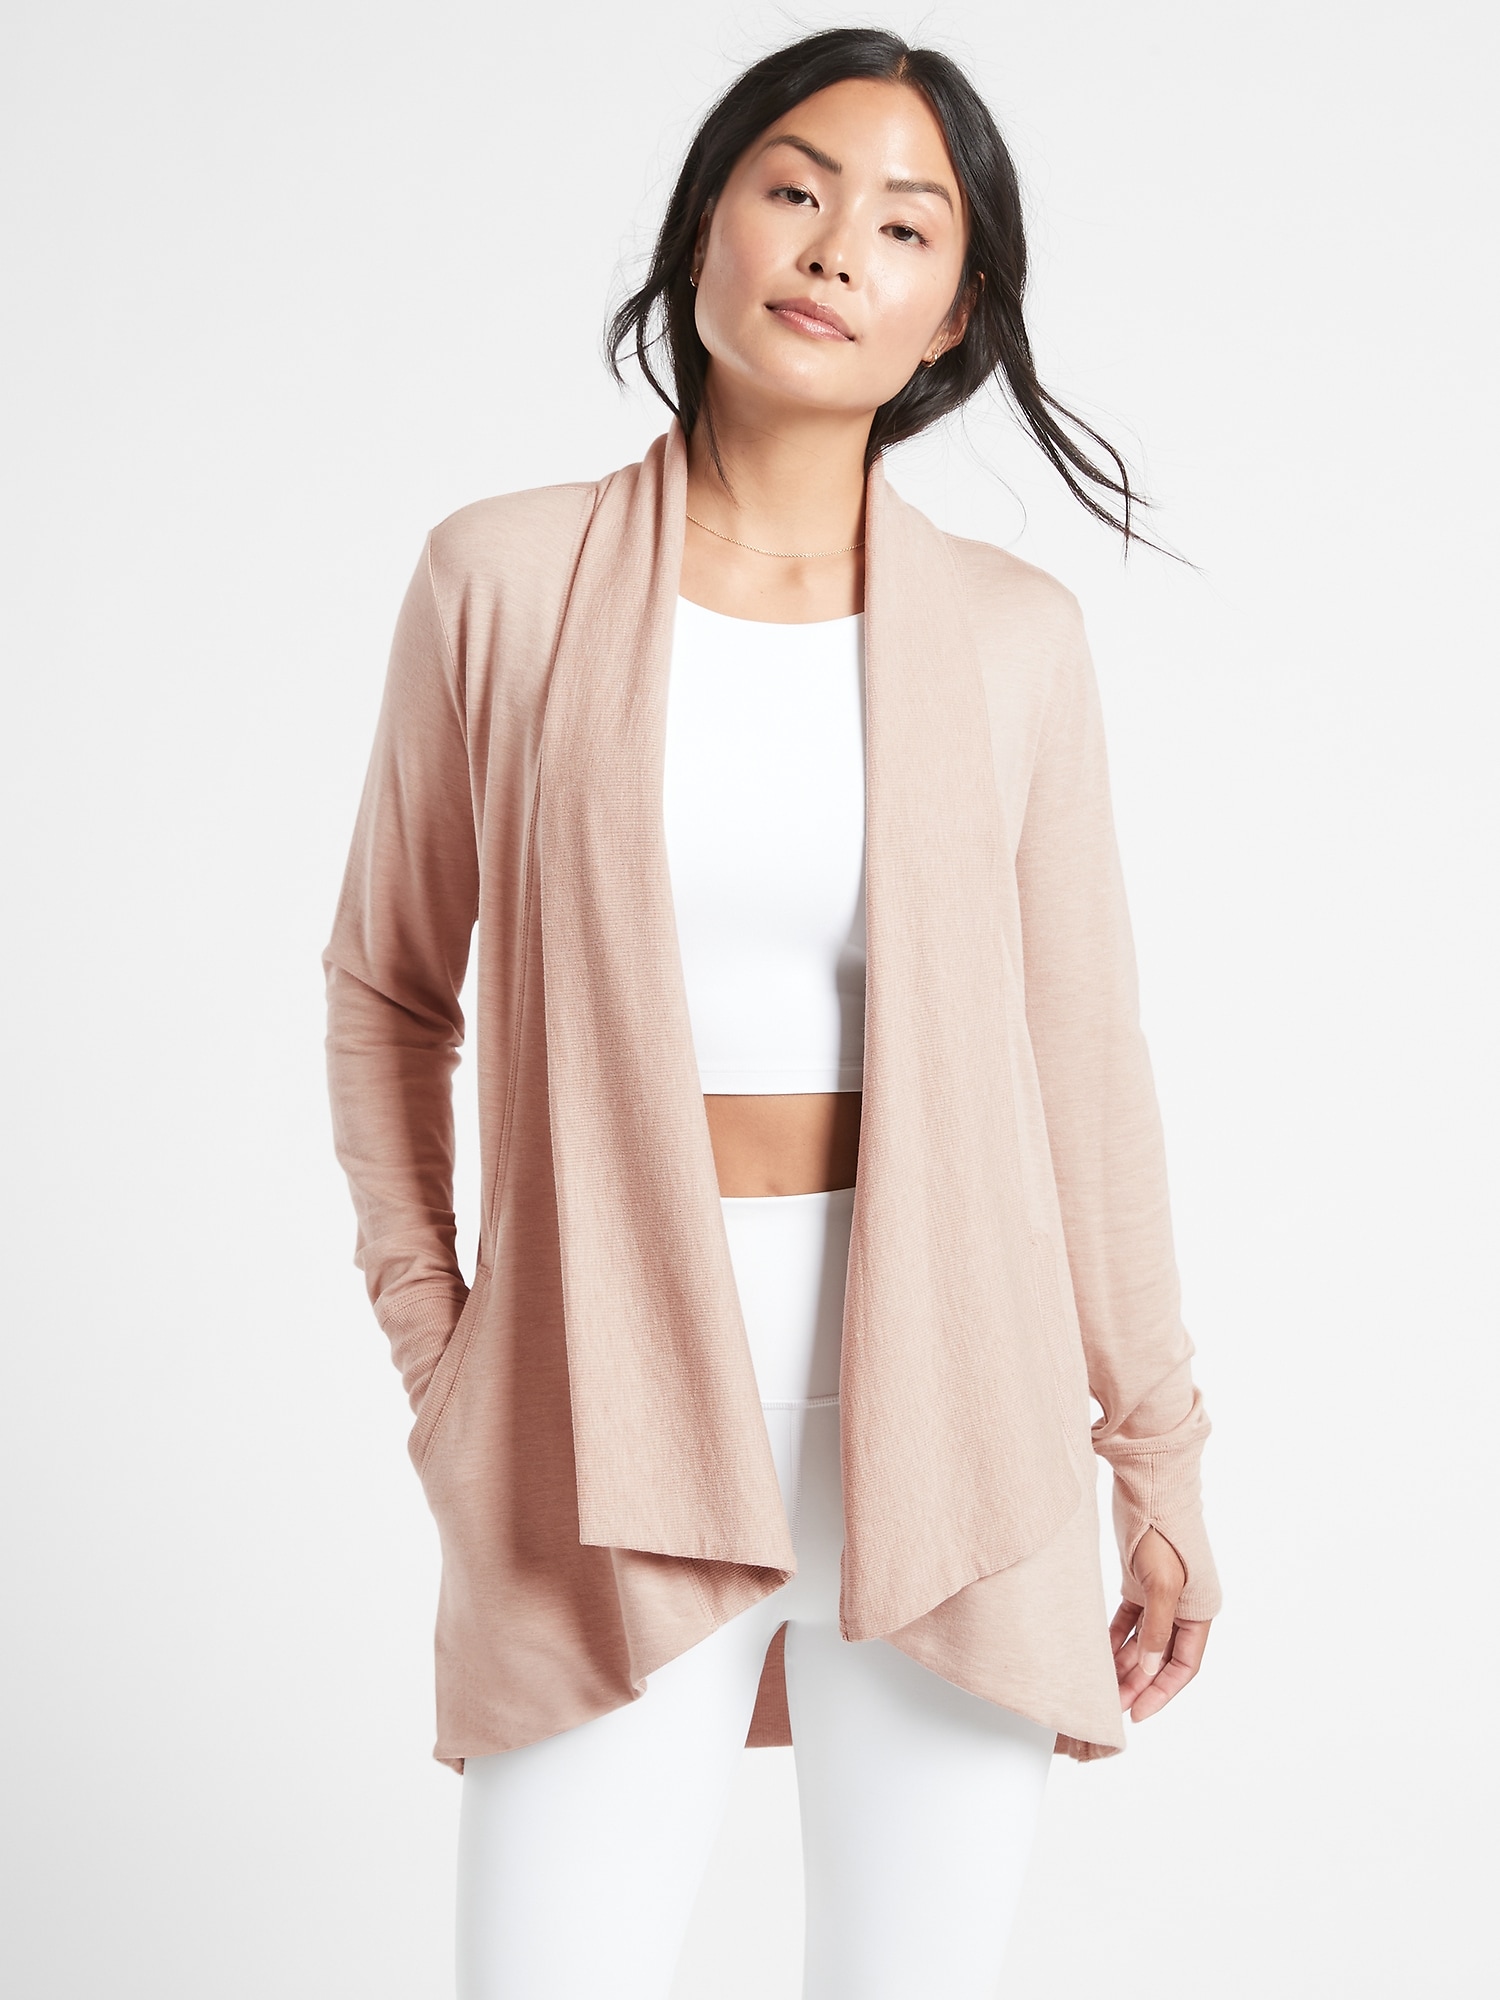 Just Posted - I FOUND THE BEST ALTERNATIVE EVER FOR THE ATHLETA PRANAYAMA  WRAP!!! One wrap is $89, one wrap is $28!!!! They are both incredibly soft  and comfortable too! (Affiliate links)